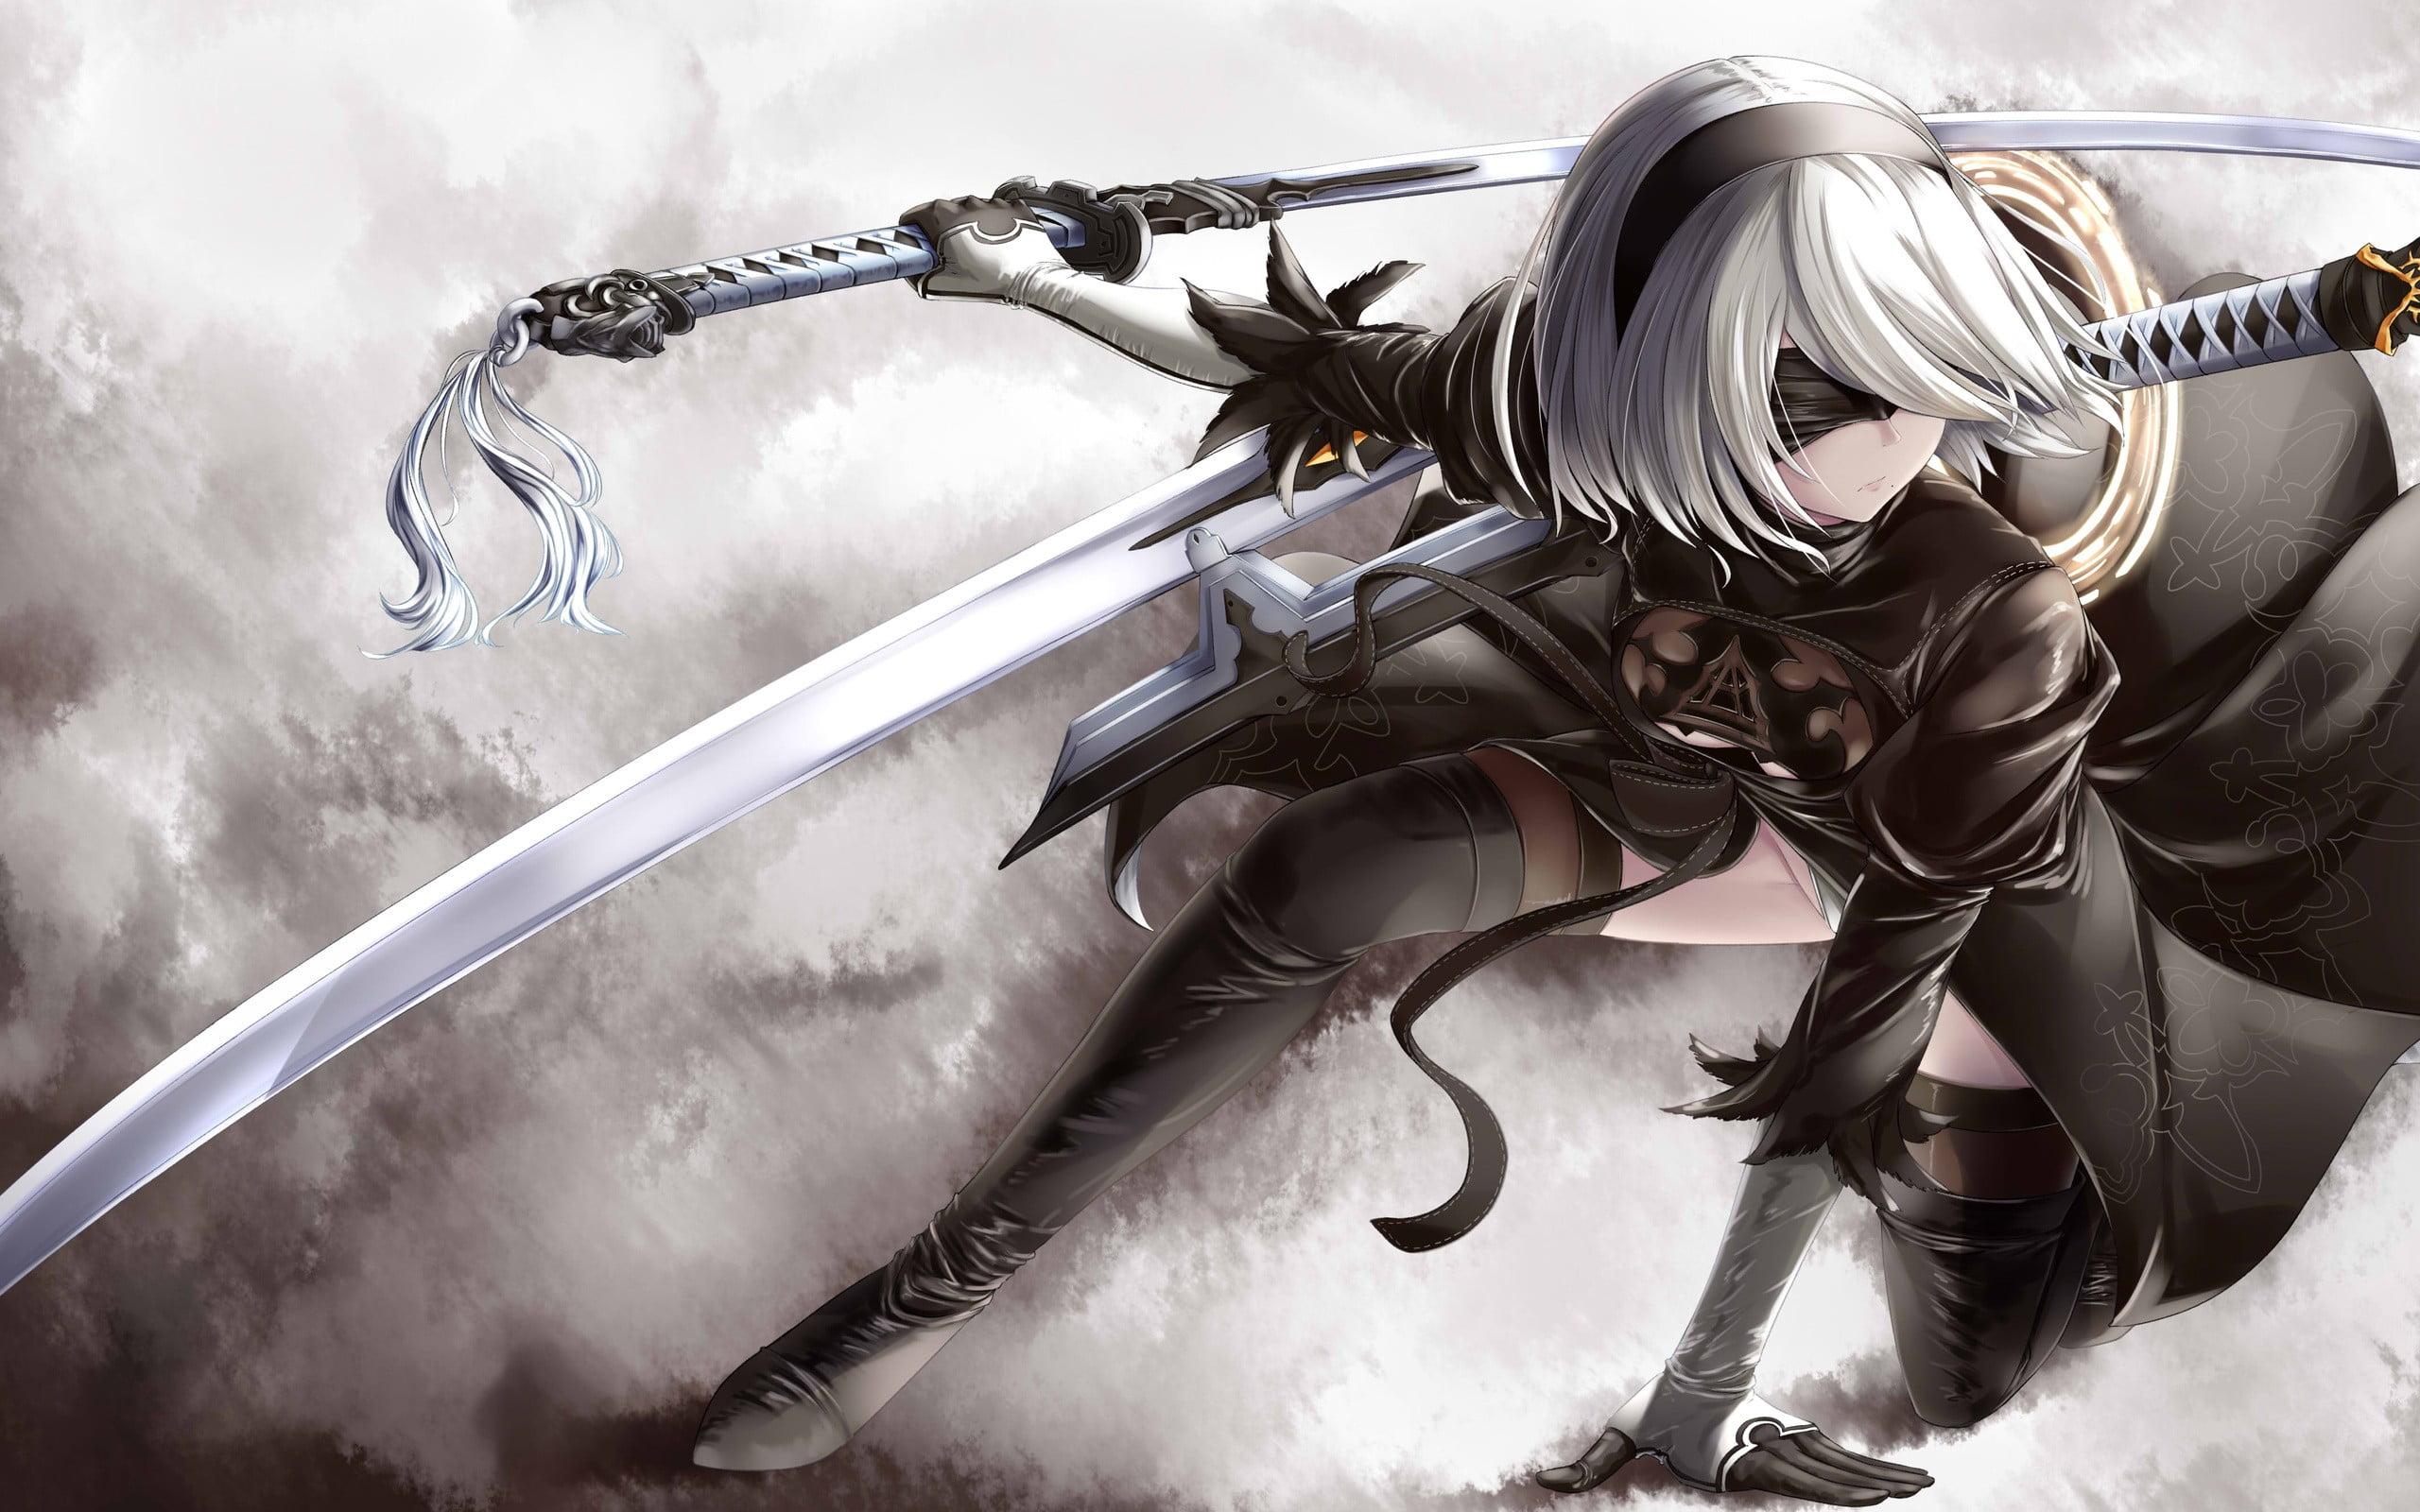 Gray and white haired swordsman anime character, Nier